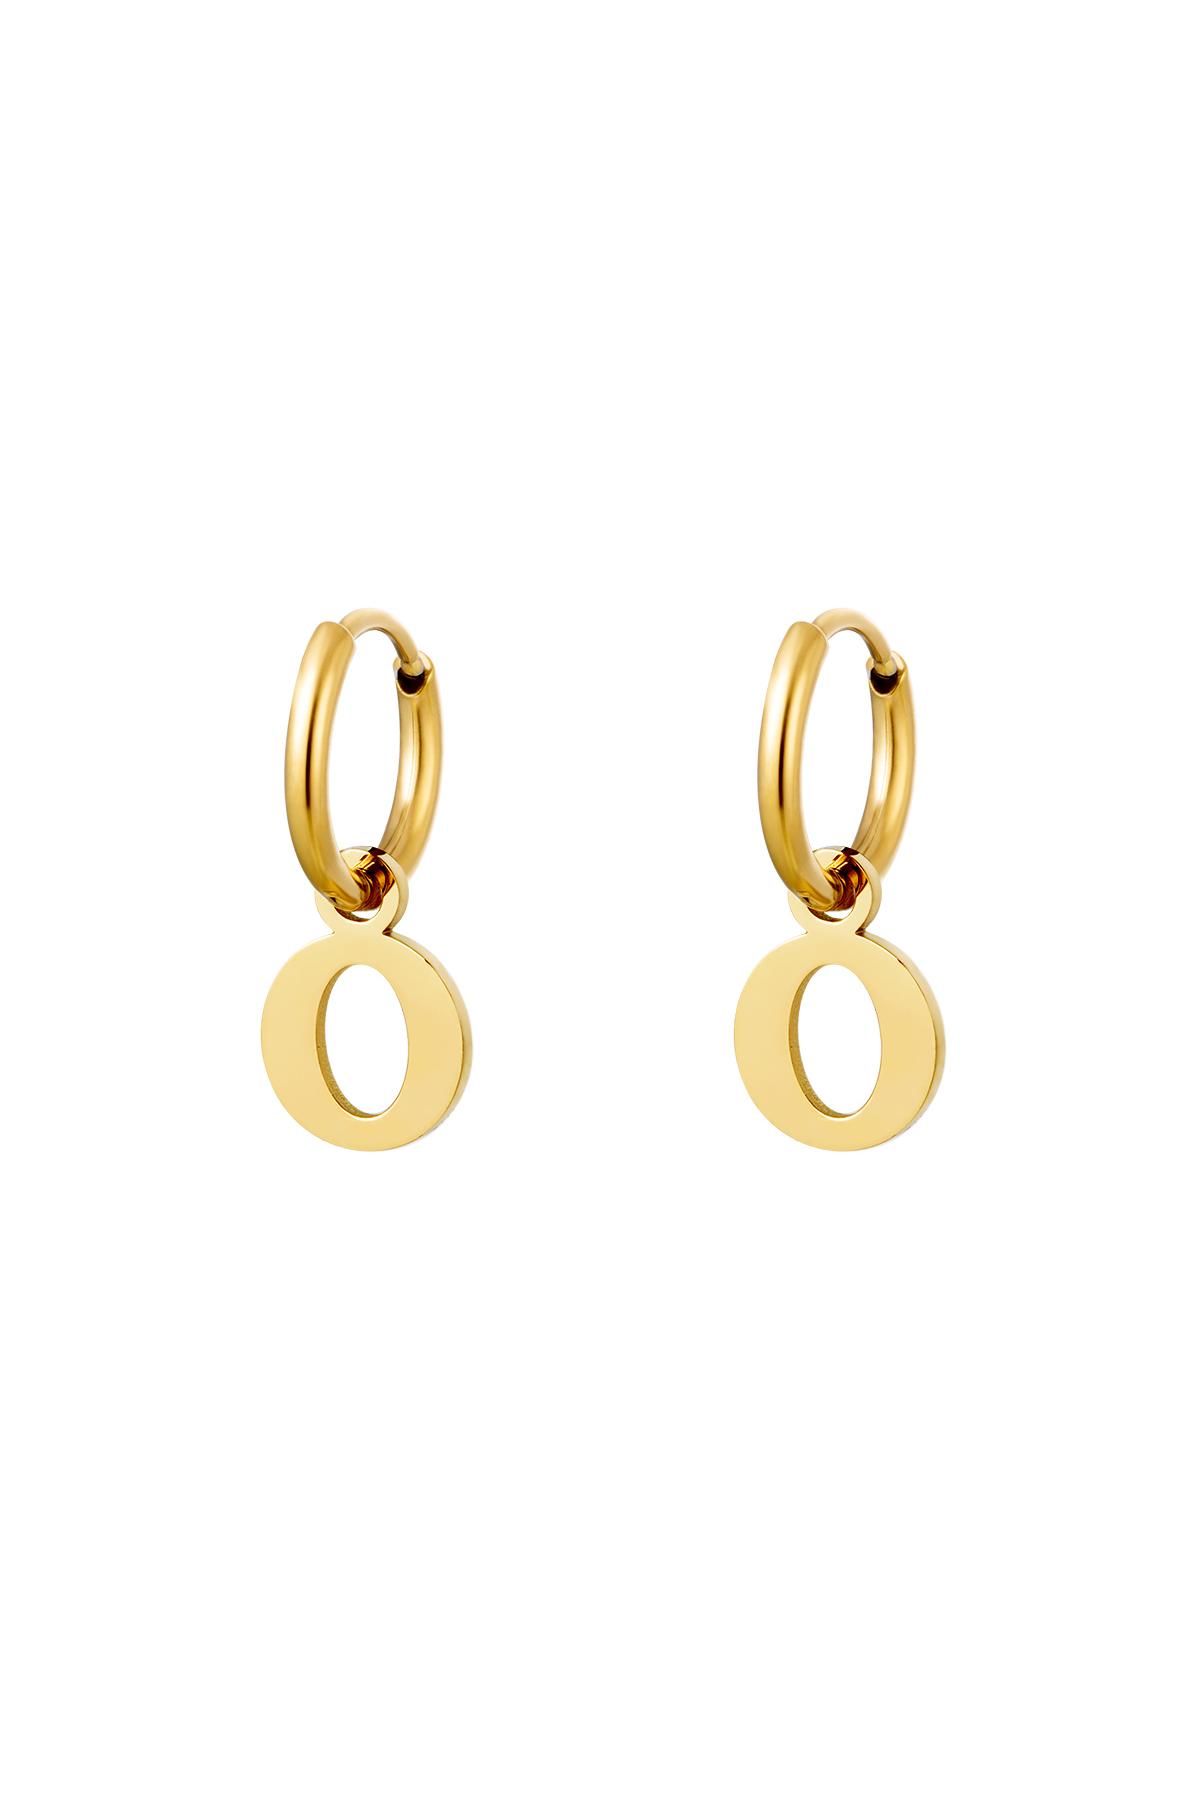 Earrings Stainless Steel Gold Initial O